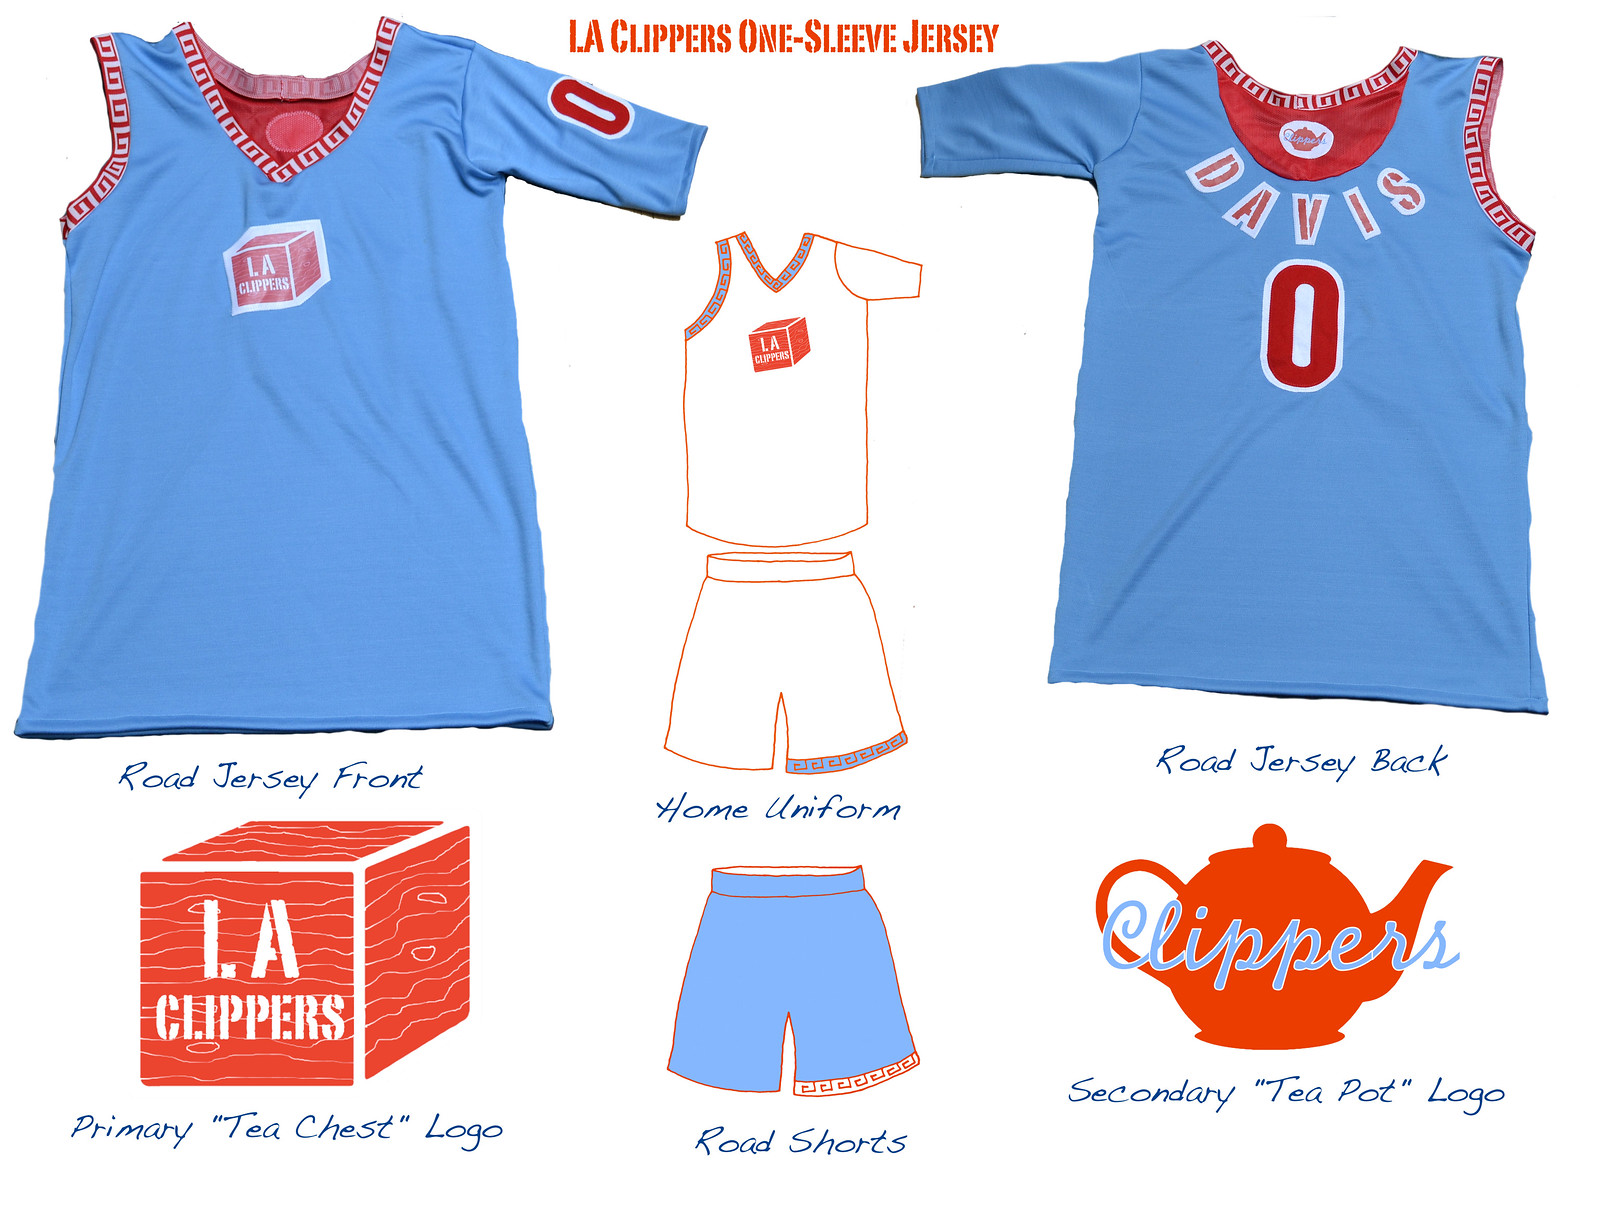 Los Angeles Clippers unveil new logo and uniforms